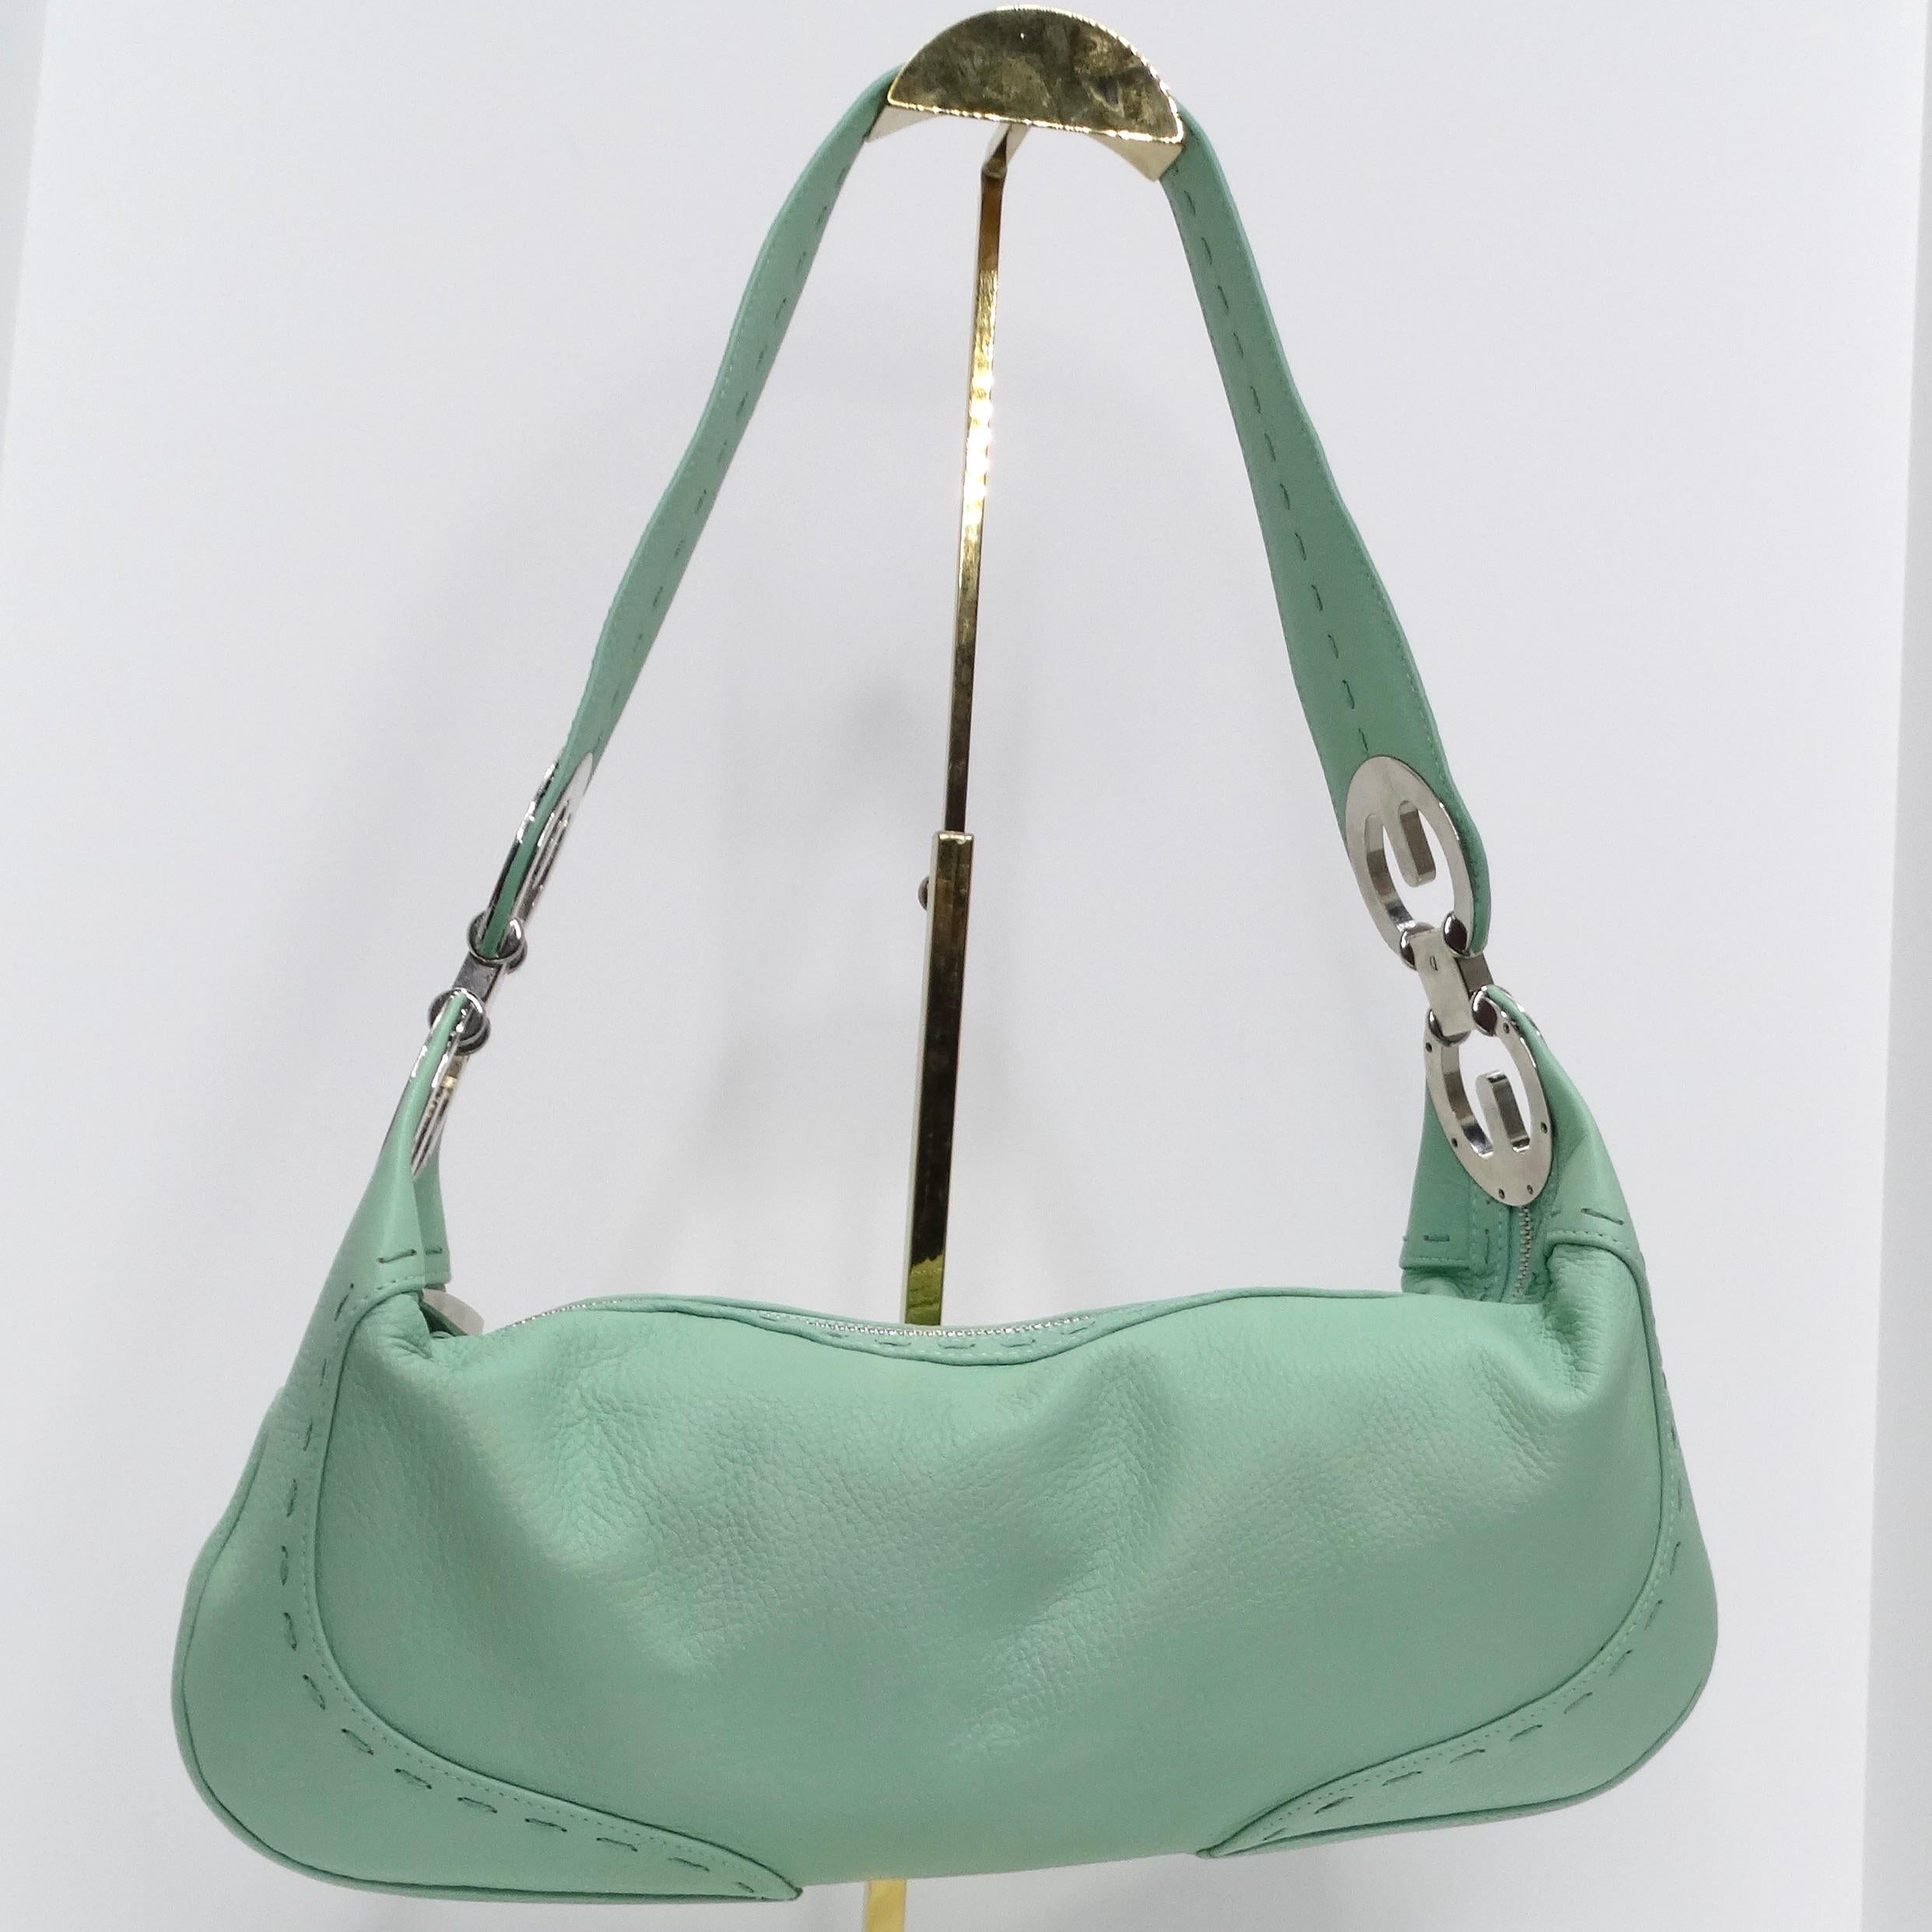 Introducing the Escada 1990s Eluna Mint Blue Leather Hobo Shoulder Bag - a masterpiece in vibrant elegance! This stunning hobo bag boasts the most beautiful mint blue leather, complemented by silver-tone accents featuring iconic Escada logos.